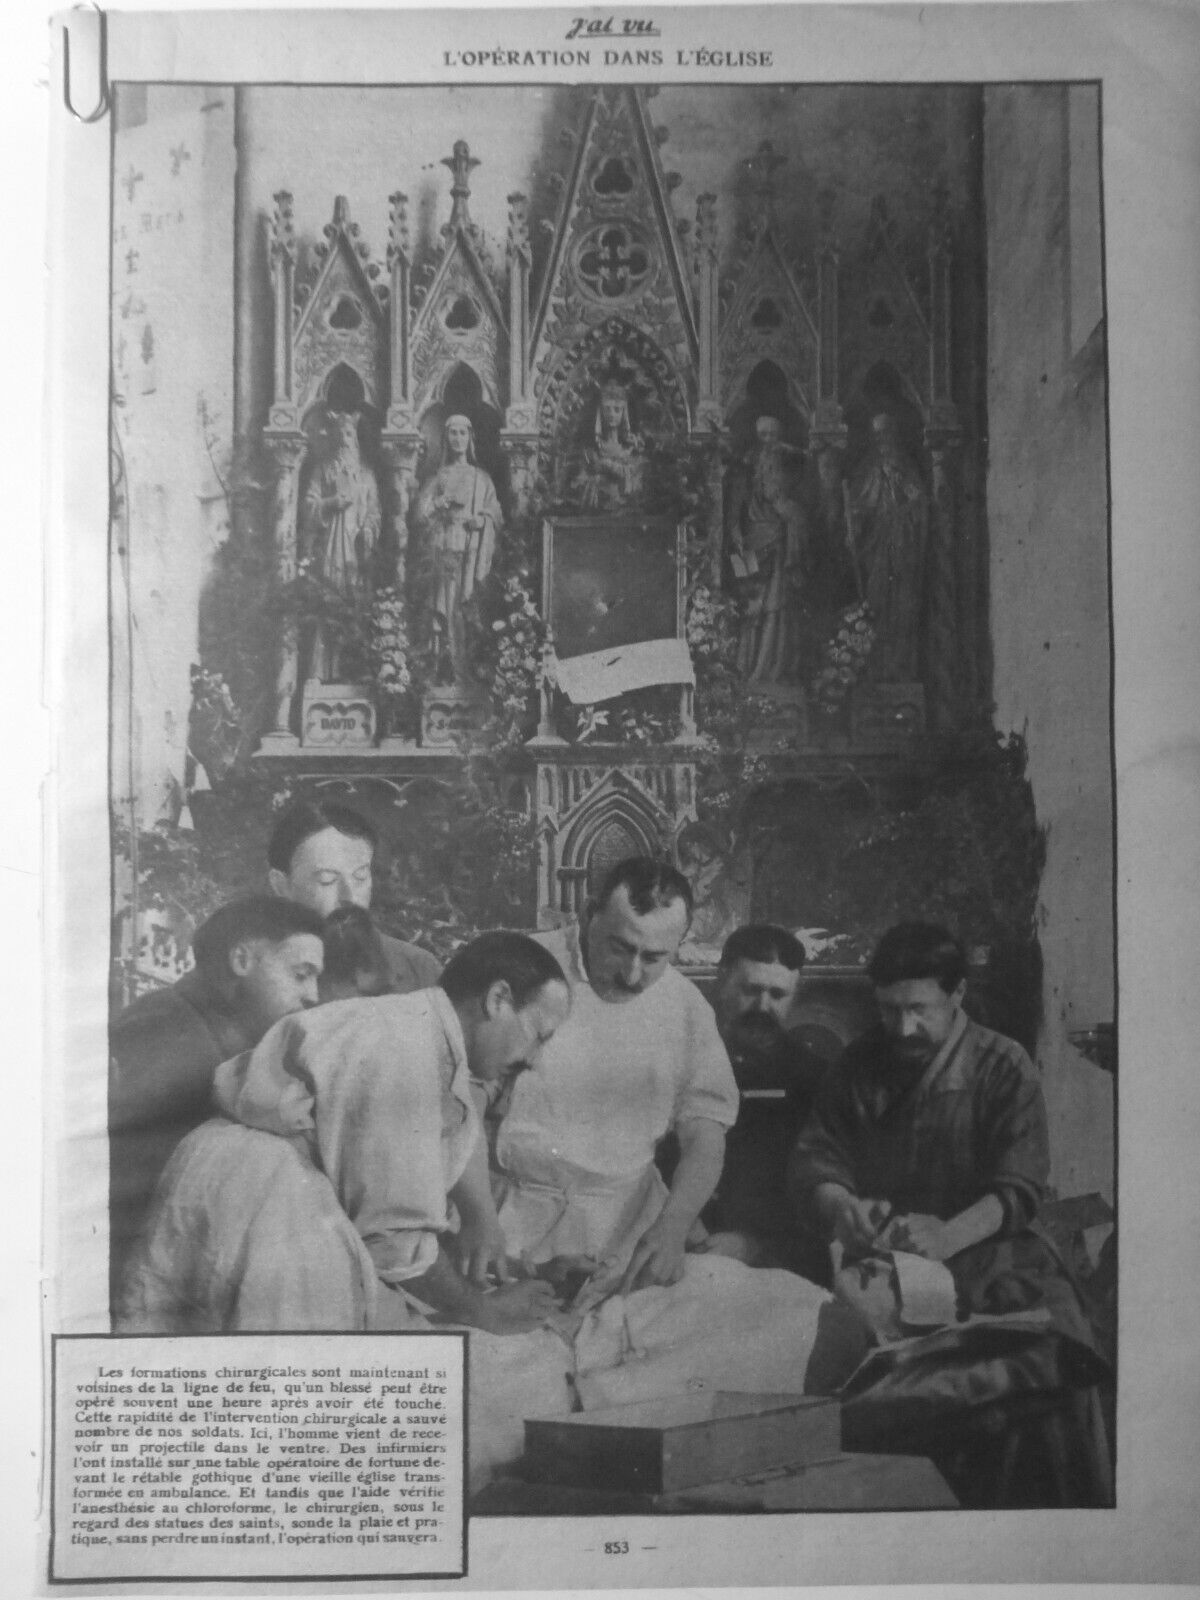 1914 1918 Surgery Guerre Operation 4 Newspapers Antique